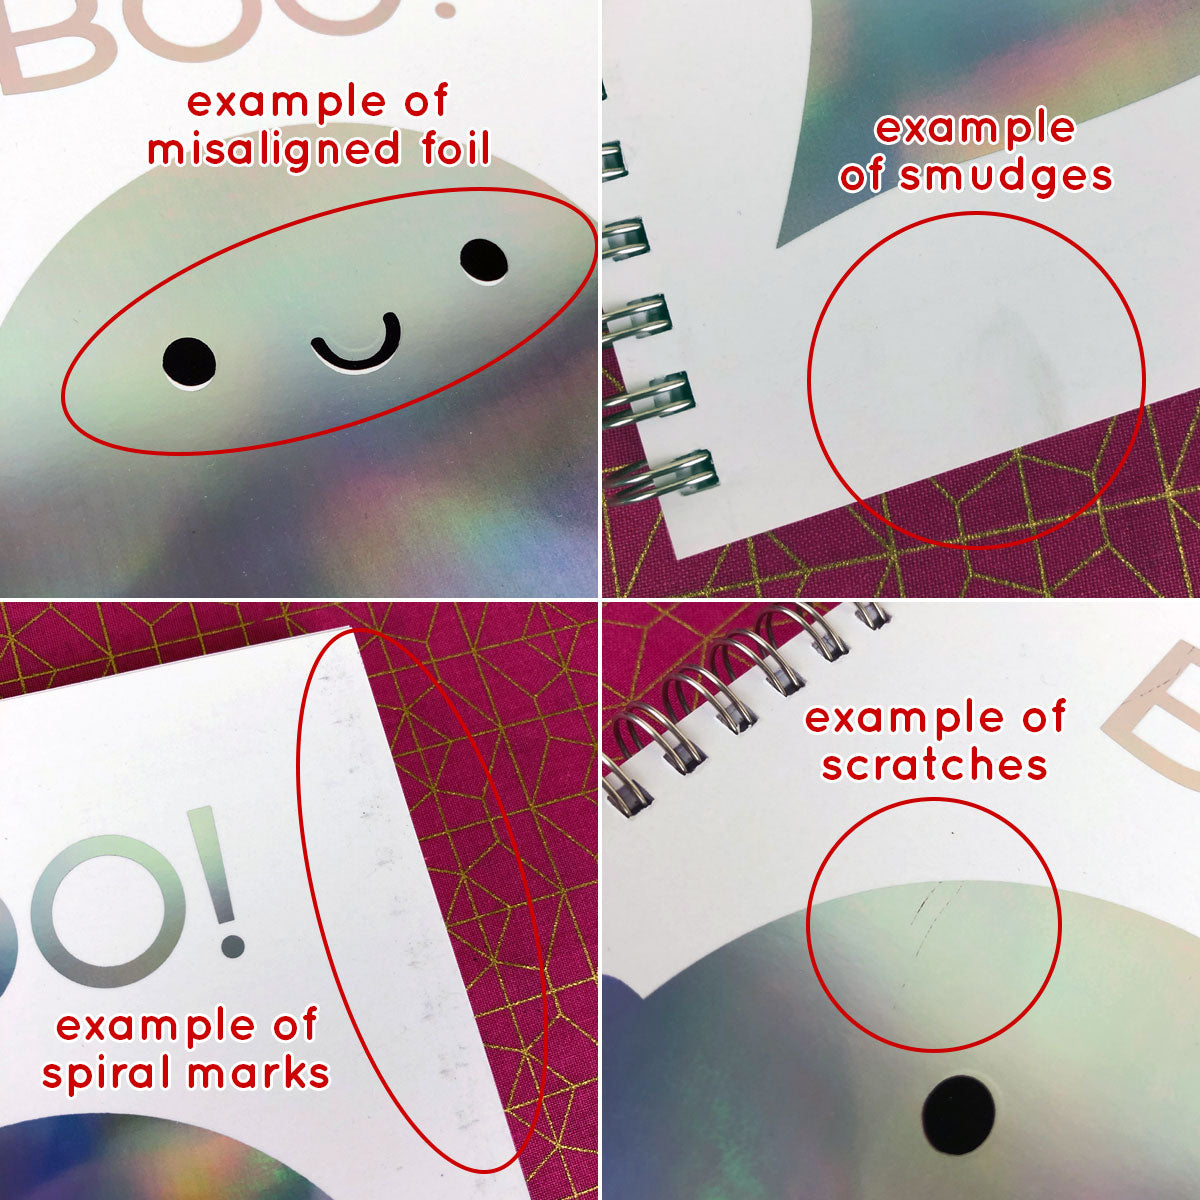 Examples of Ghost notebook seconds - misaligned foil, smudges, marks and scratches